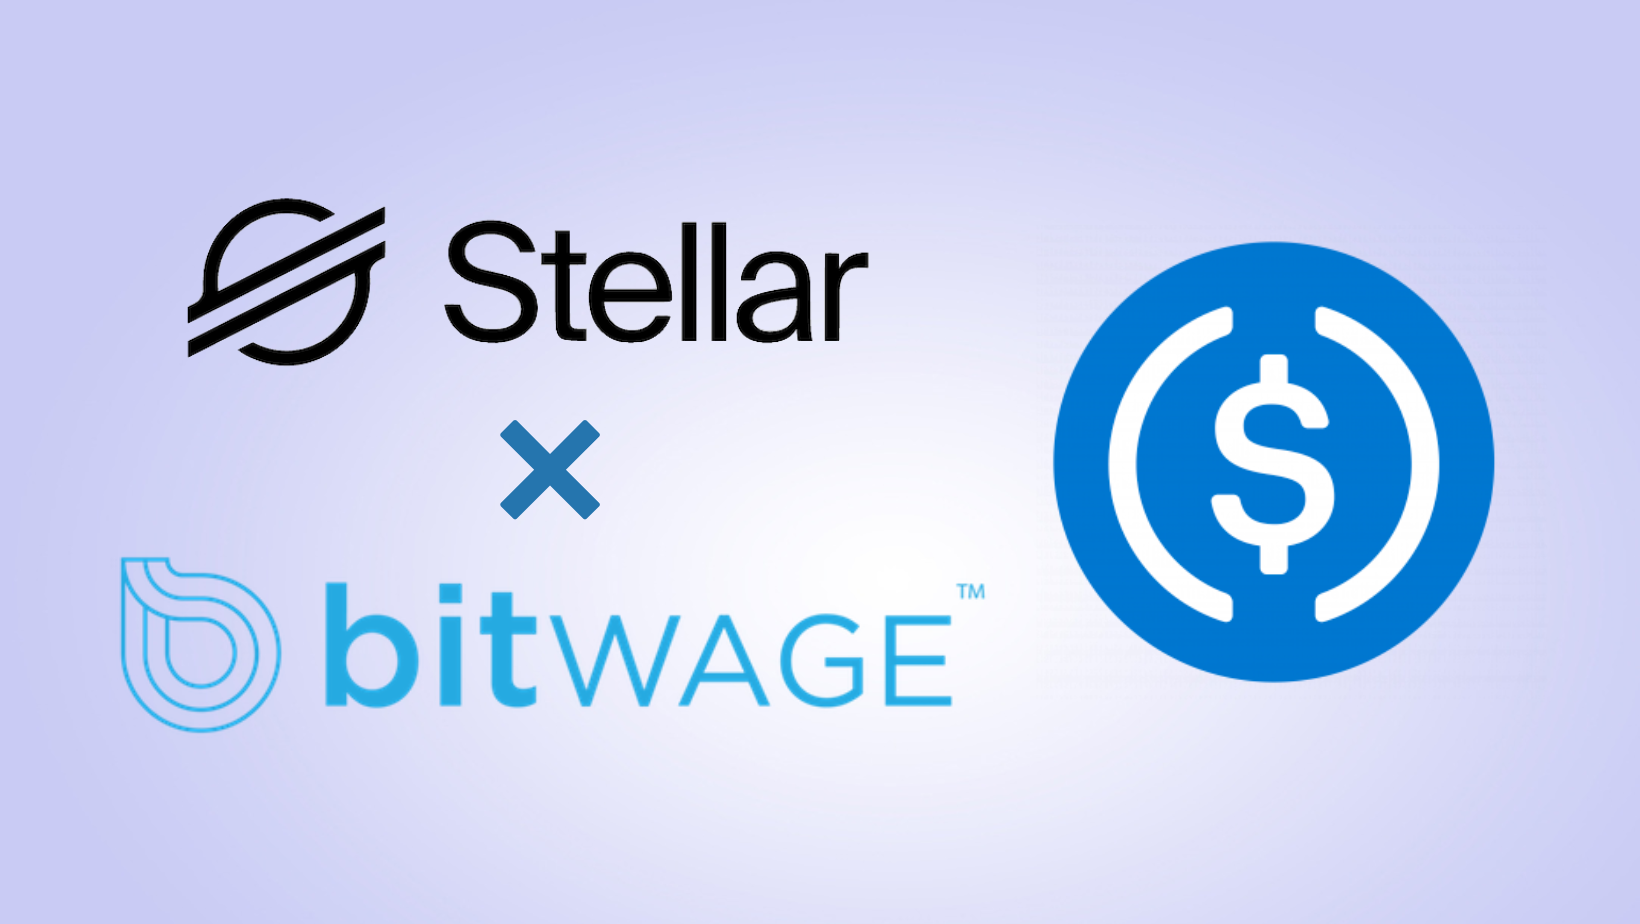 Bitwage Implements USD Coin (USDC) to Pay Remote Workers on the Stellar Blockchain